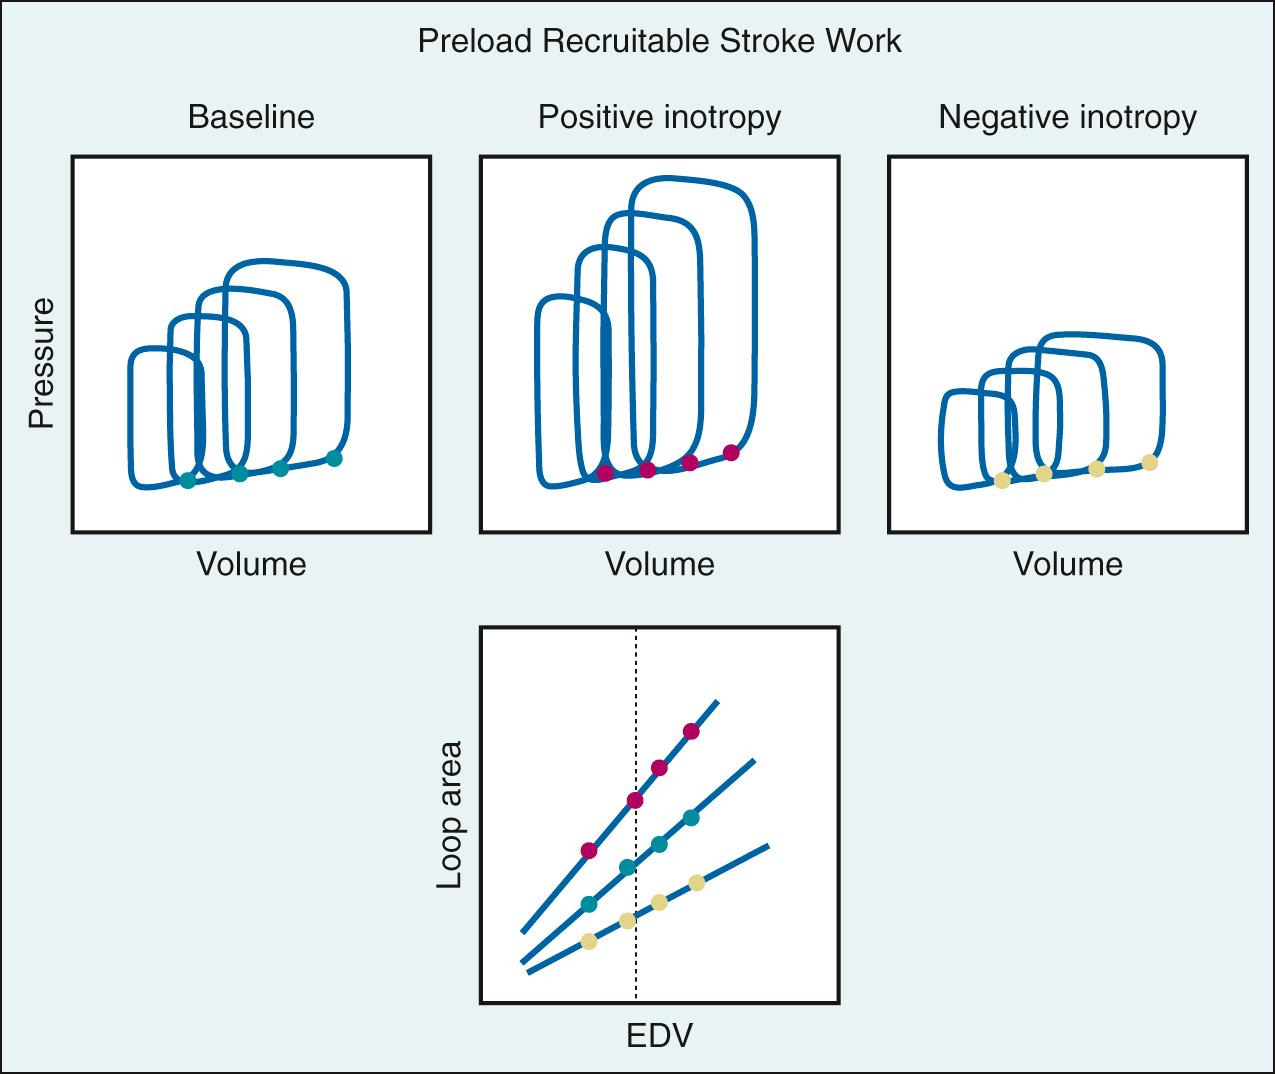 Fig. 24.8, Use of the preload recruitable stroke work to assess the inotropic state of the ventricle. Vena caval occlusion causes a progressive reduction in ventricular end-diastolic volume. The area of the pressure-volume loop is plotted for each beat as a function of the end-diastolic volume. The slope of this relationship defines how much work the ventricle can perform for a given preload and is a reflection of contractility—that is, a rise in the slope indicates increased contractility, and a fall in the slope indicates decreased contractility. EDV, End-diastolic volume.